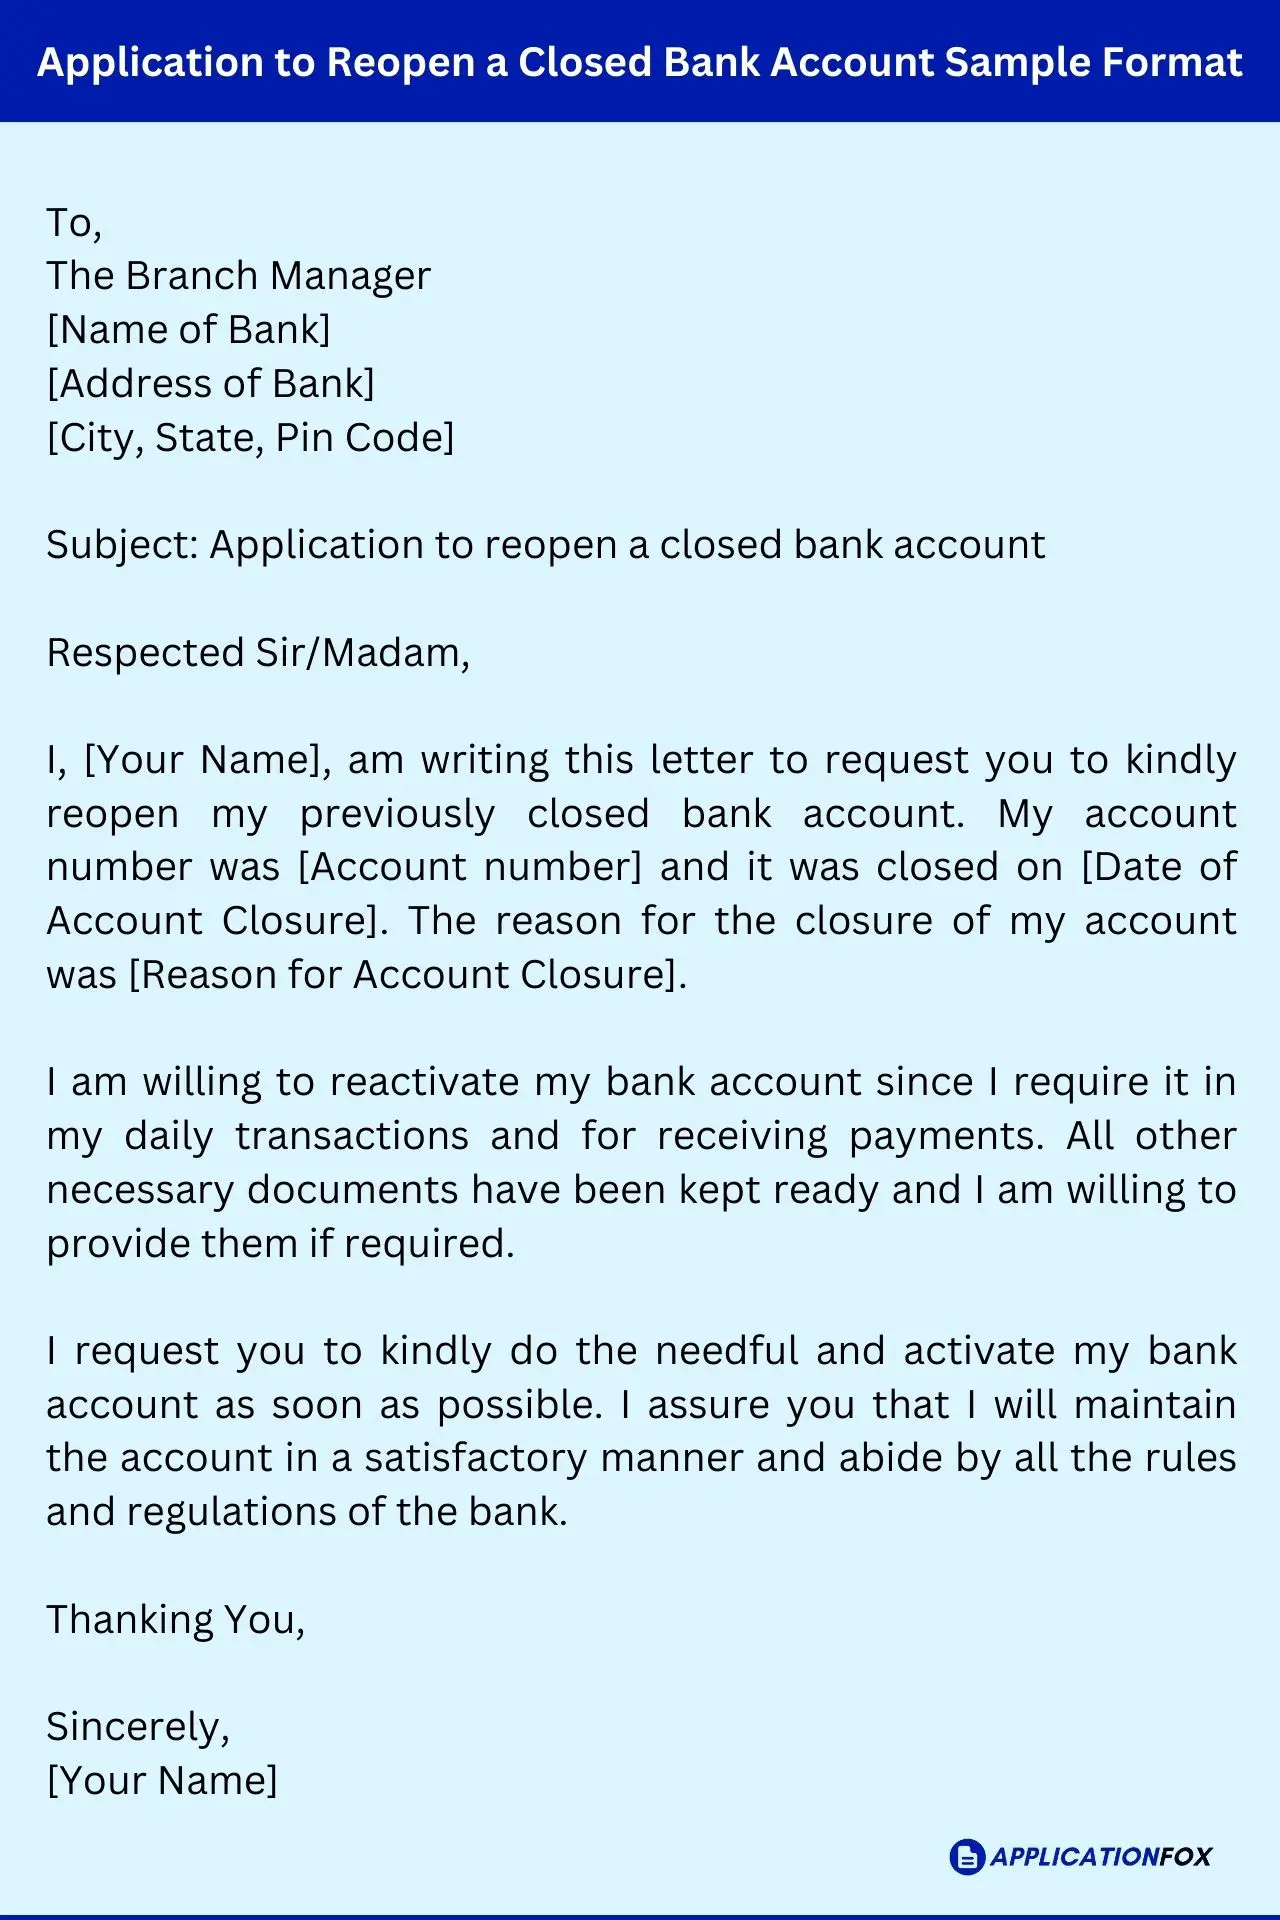 application letter to bank manager for reopen account